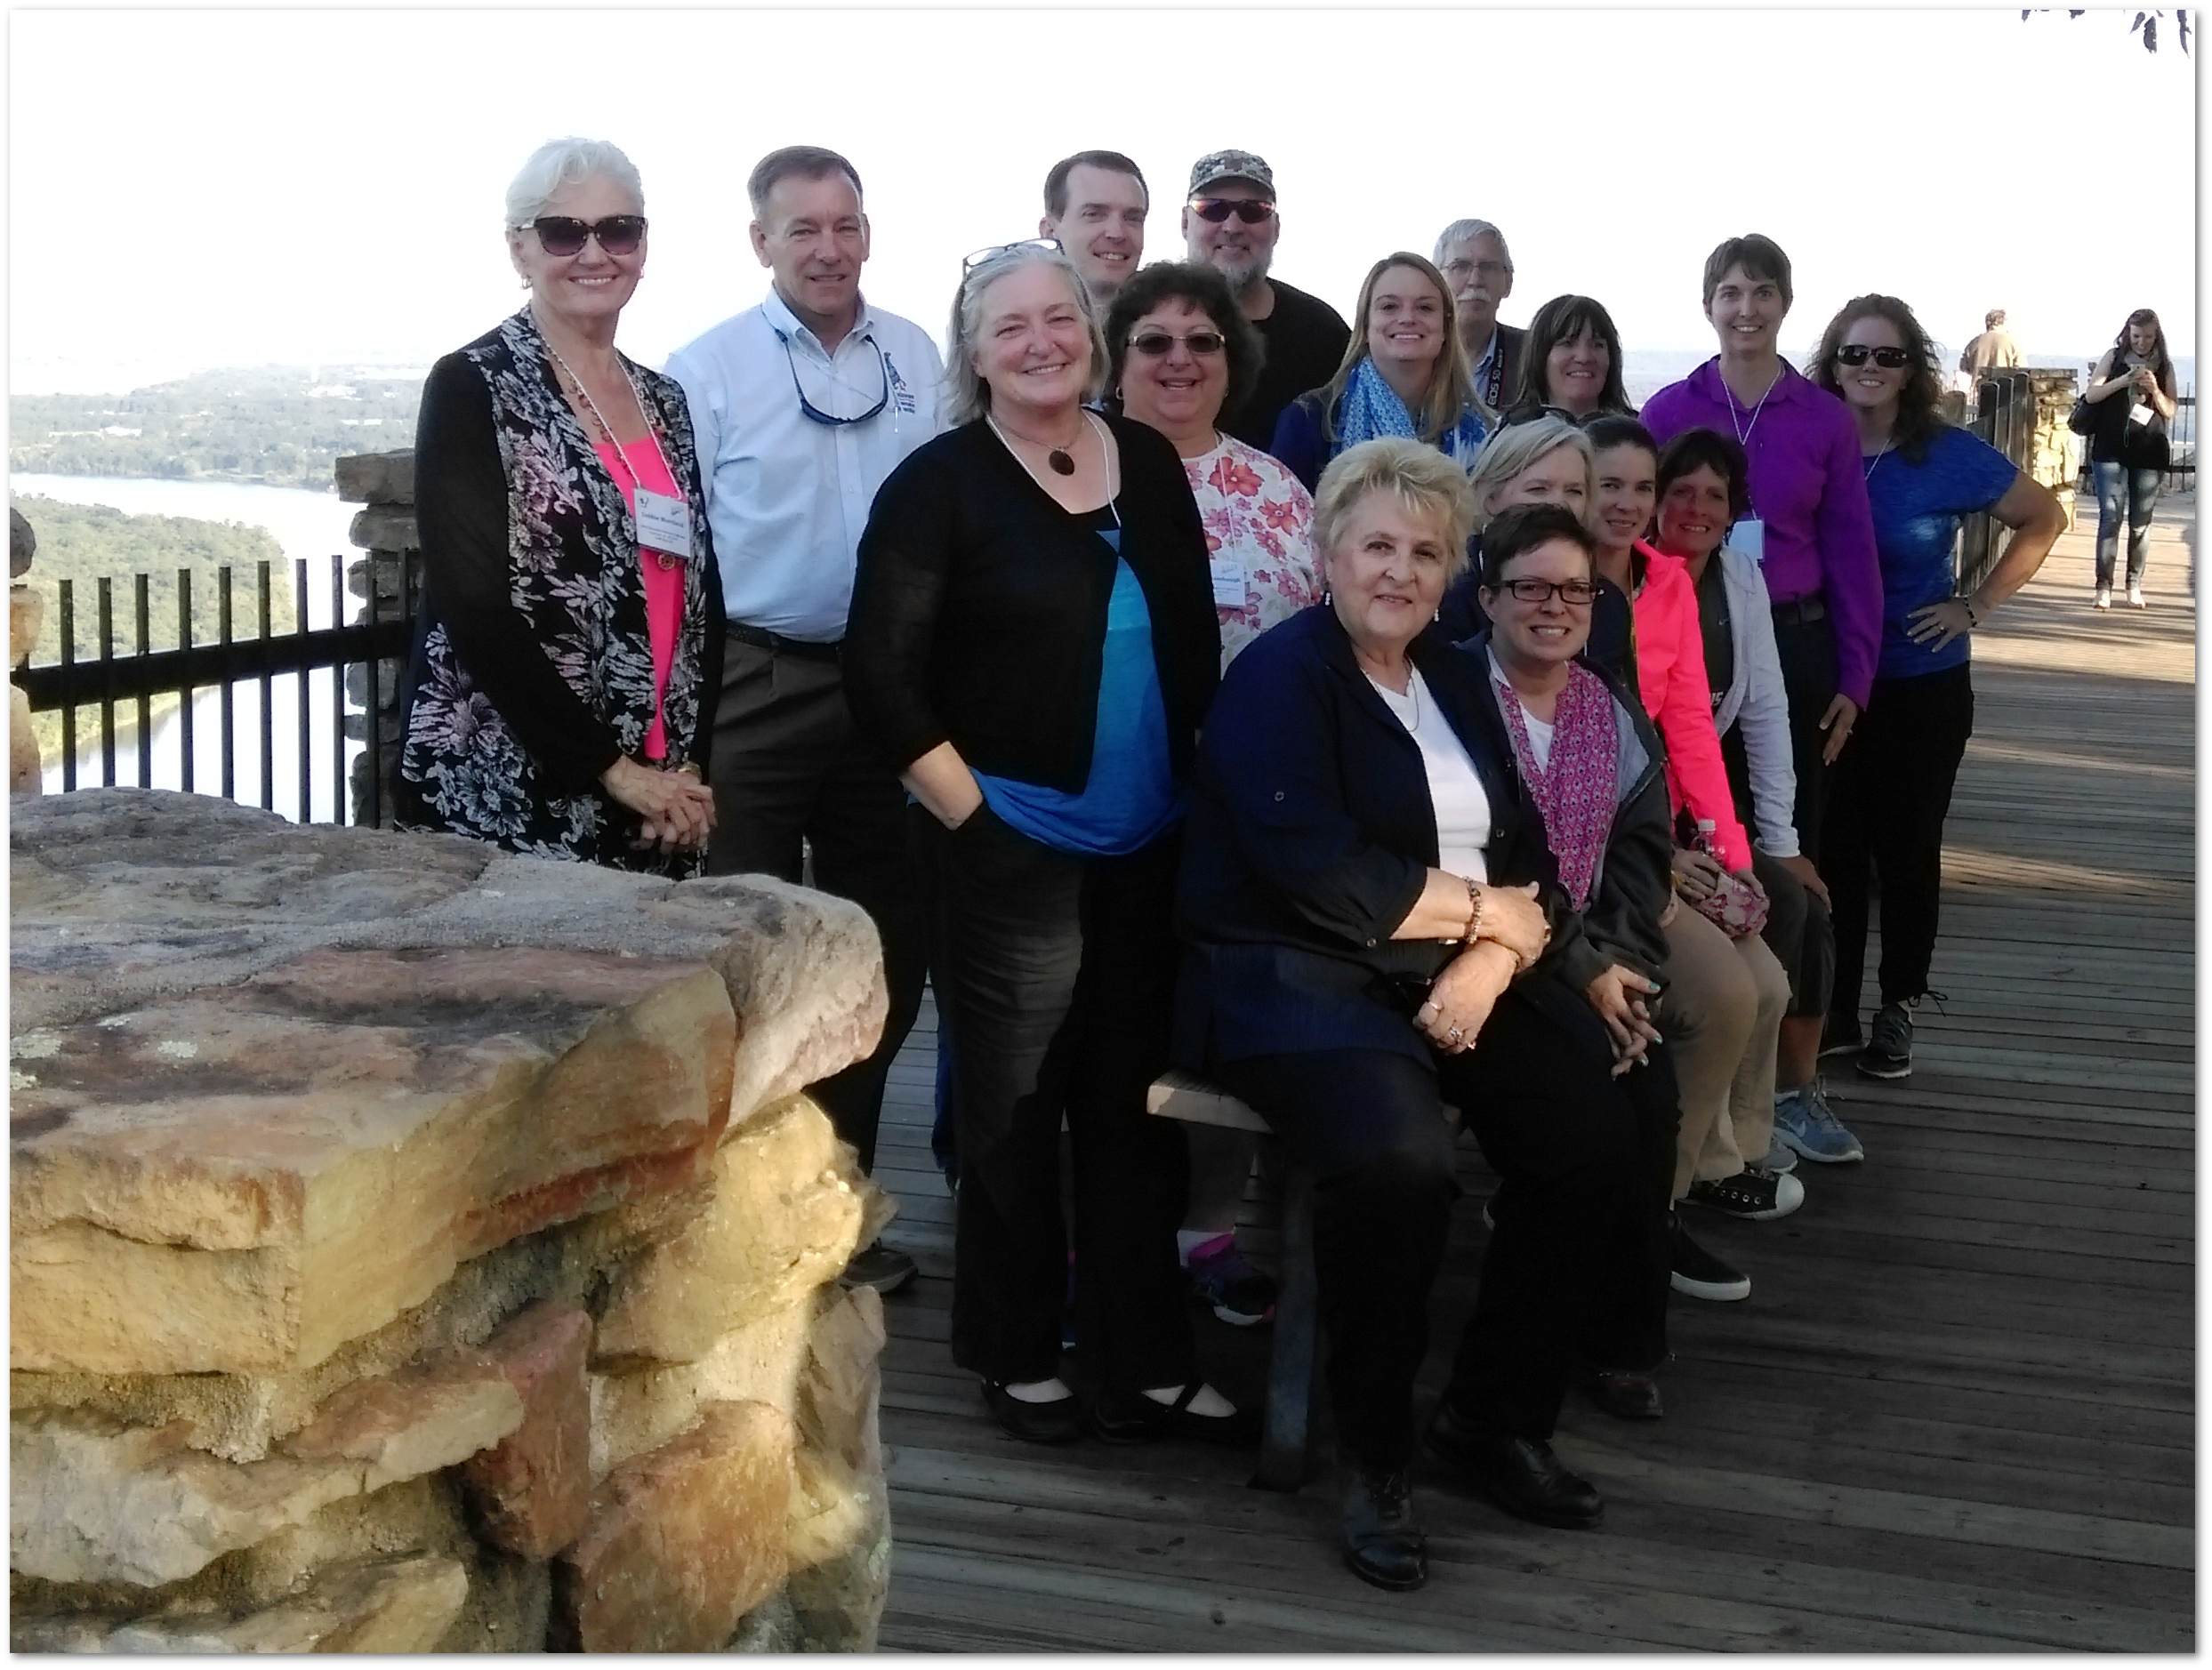 Attendees of the NACD Executive Director Conference pose in front of the Arkansas River. PACD Executive Director Brenda Shambaugh is pictured in the middle row, second from the left.